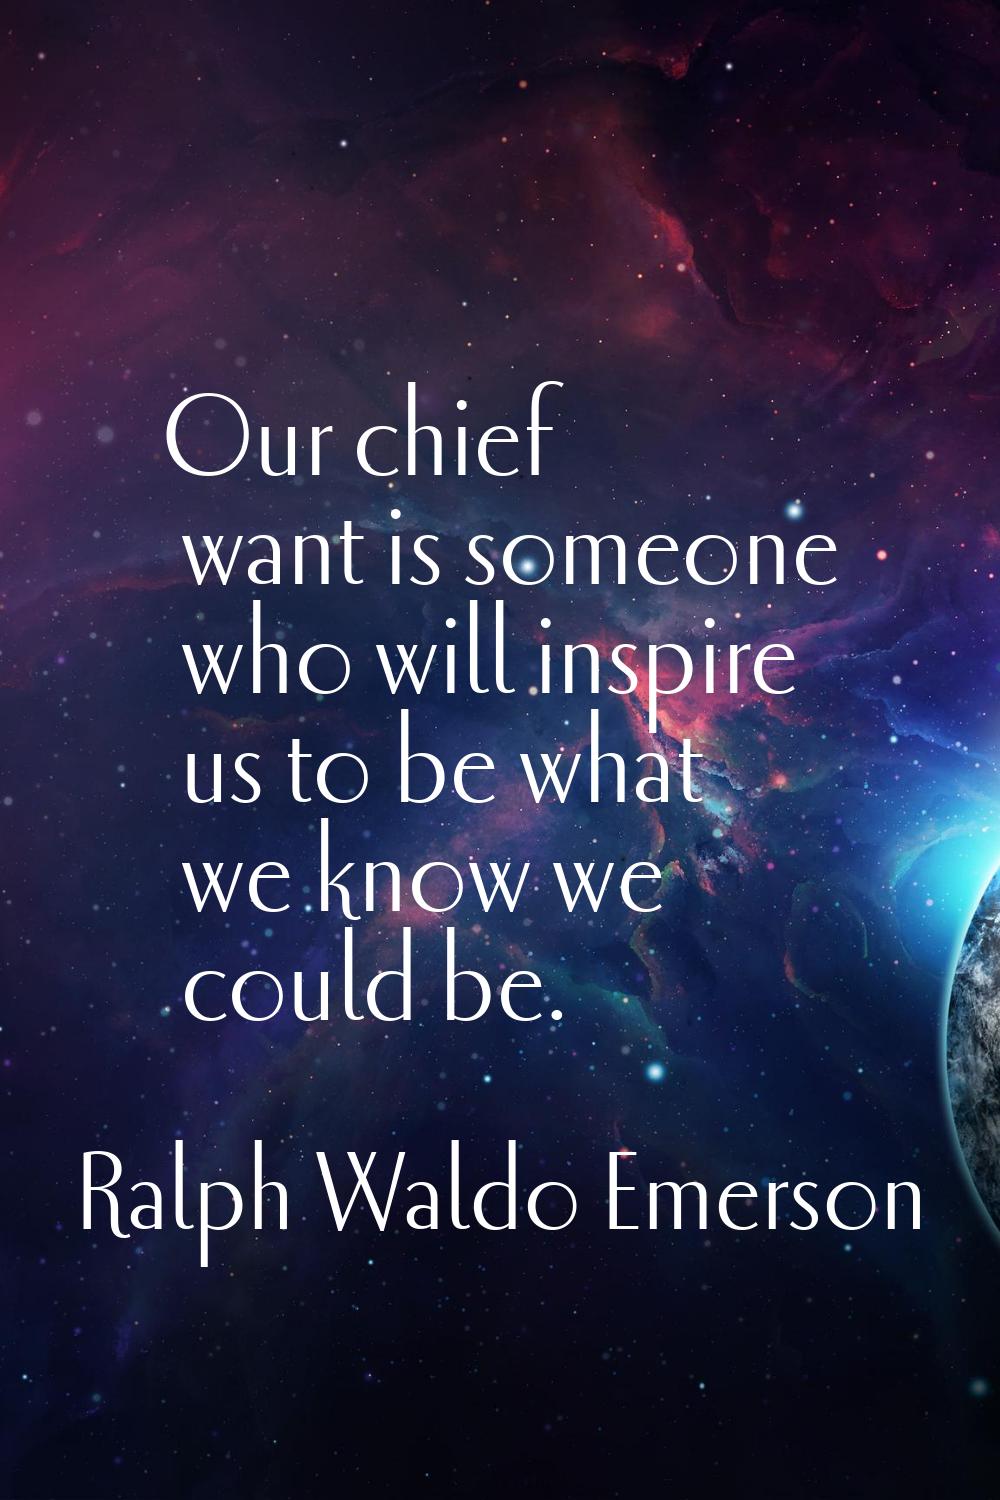 Our chief want is someone who will inspire us to be what we know we could be.